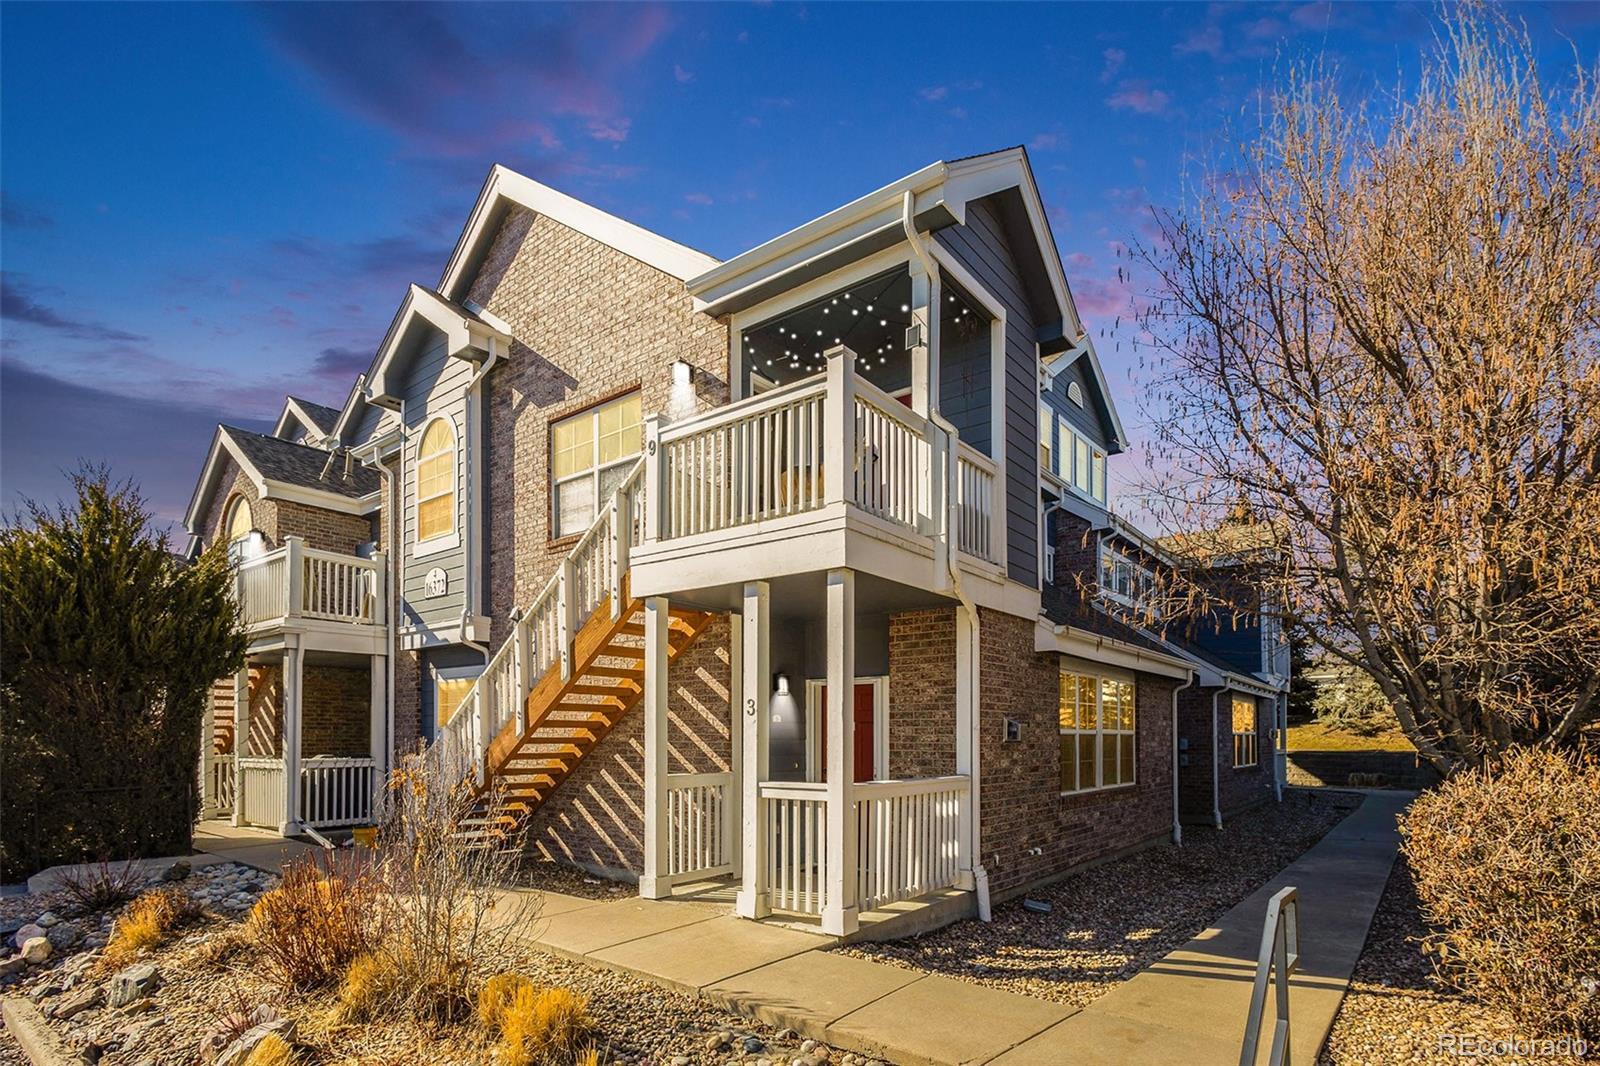 Photo one of 16372 E Fremont Ave # 3 Aurora CO 80016 | MLS 8177871